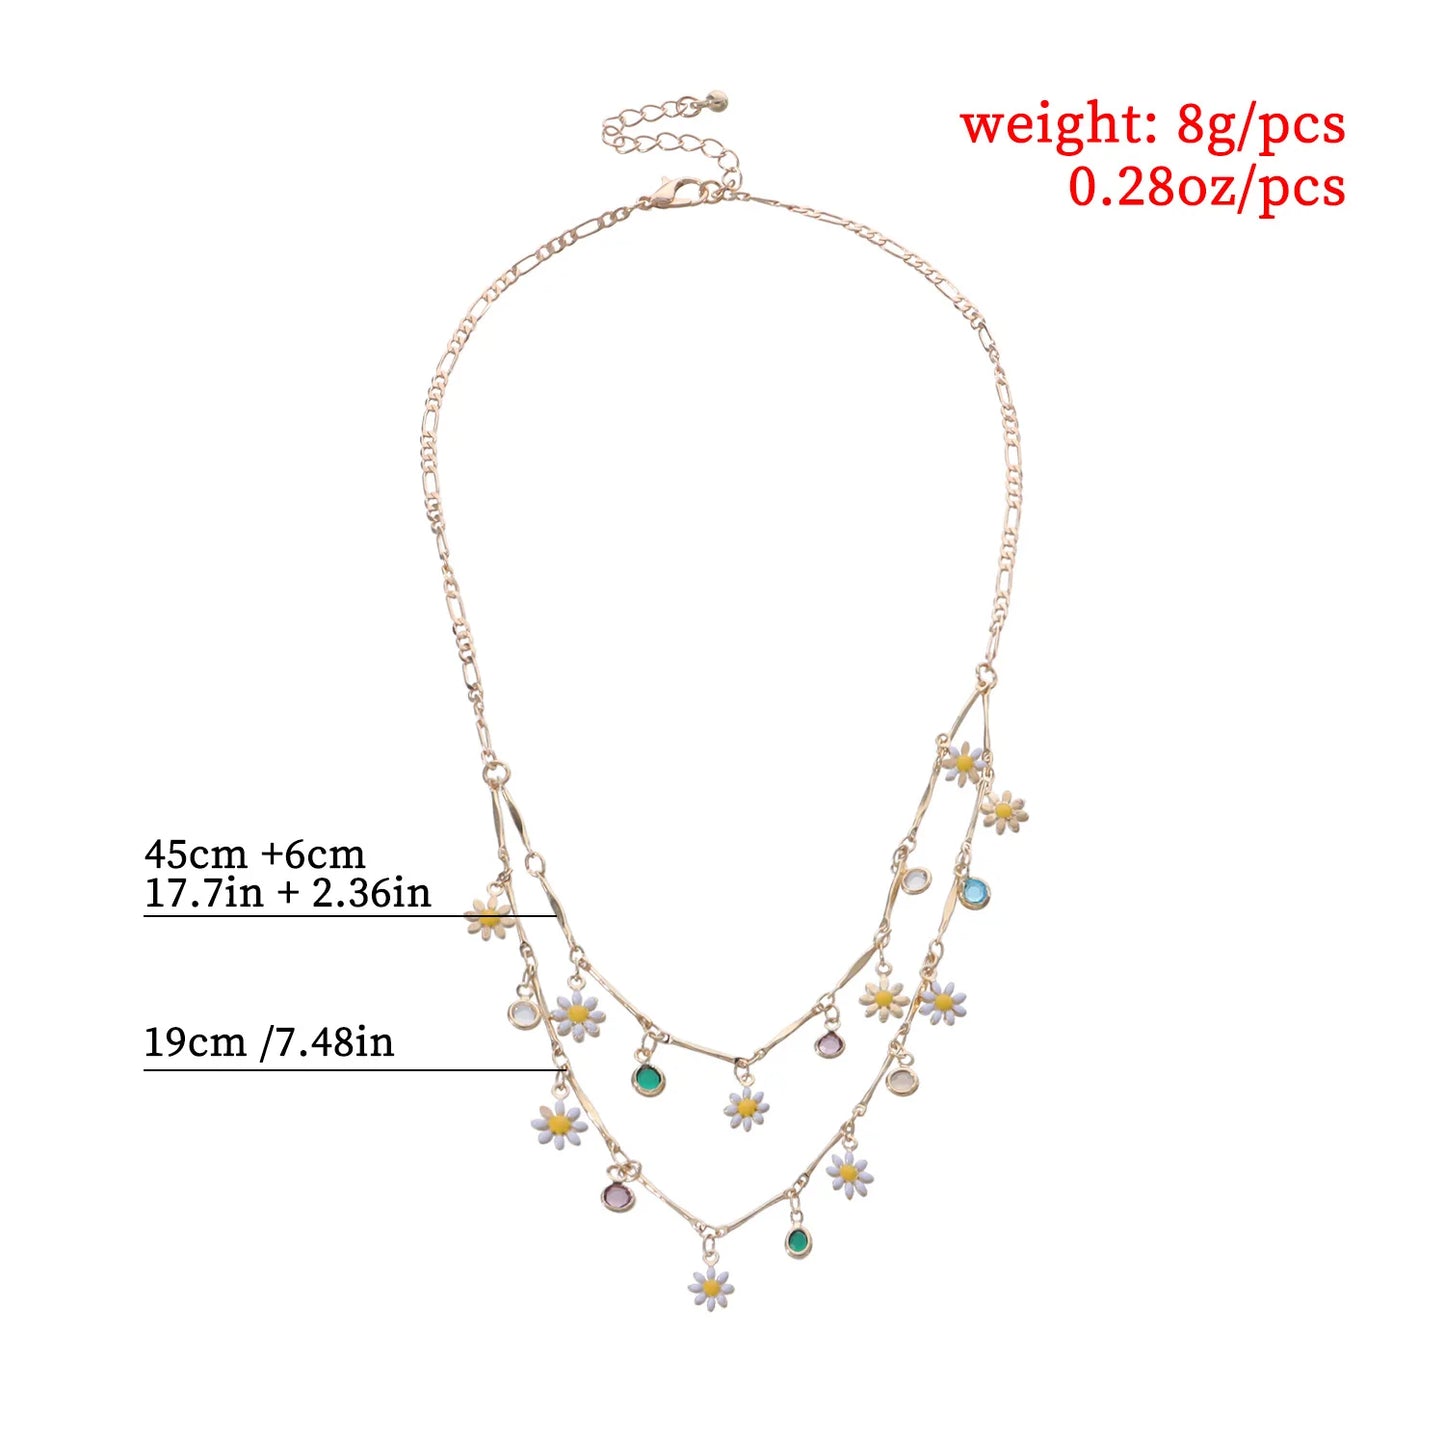 Daisy Bloom Double Layer Necklace